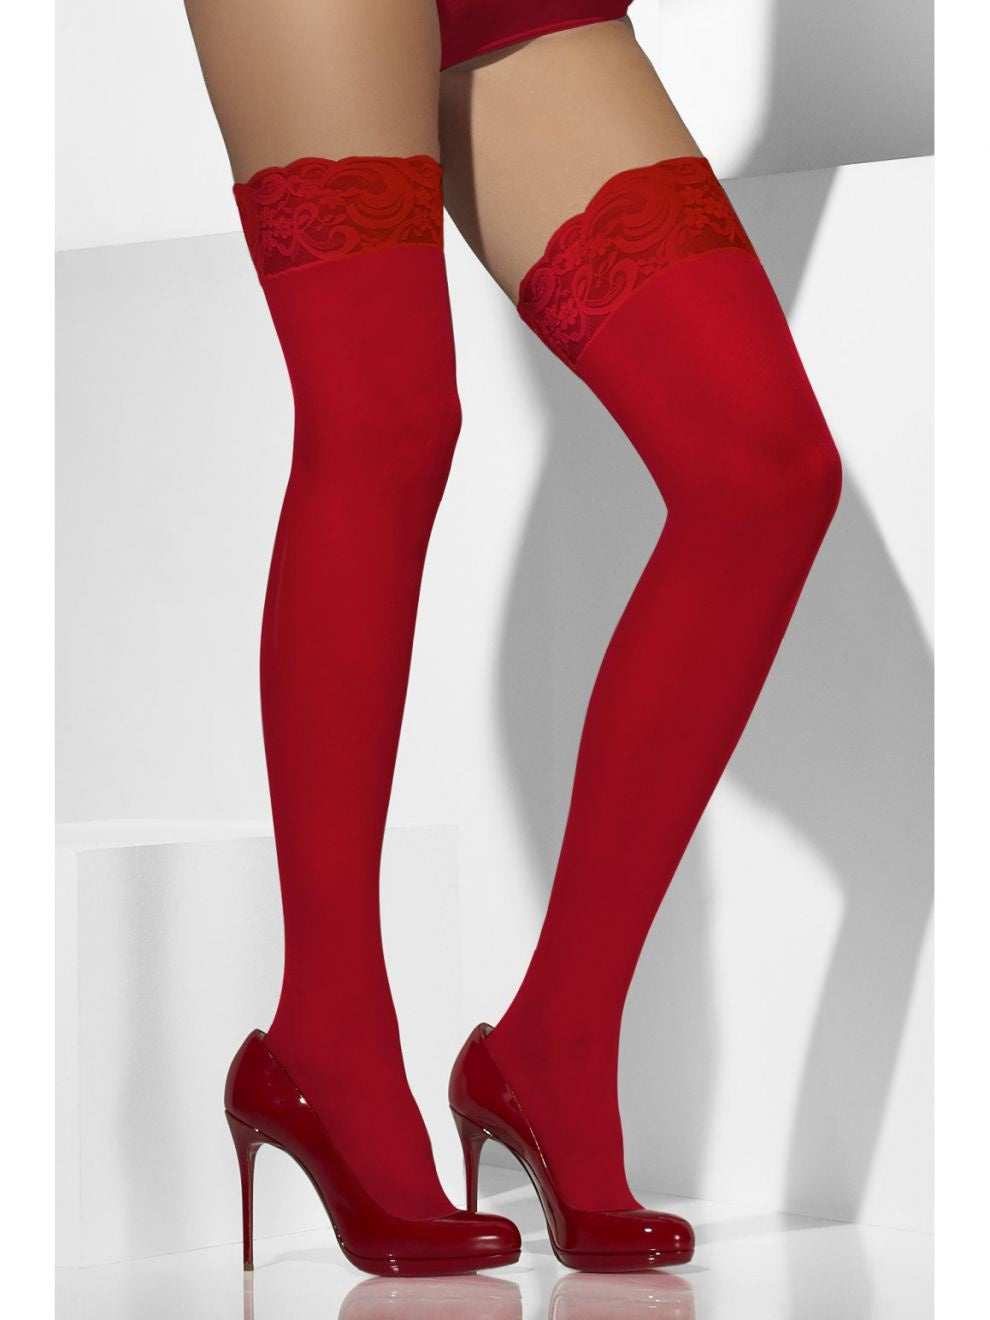 Red Lace Tops Sheer Hold Ups